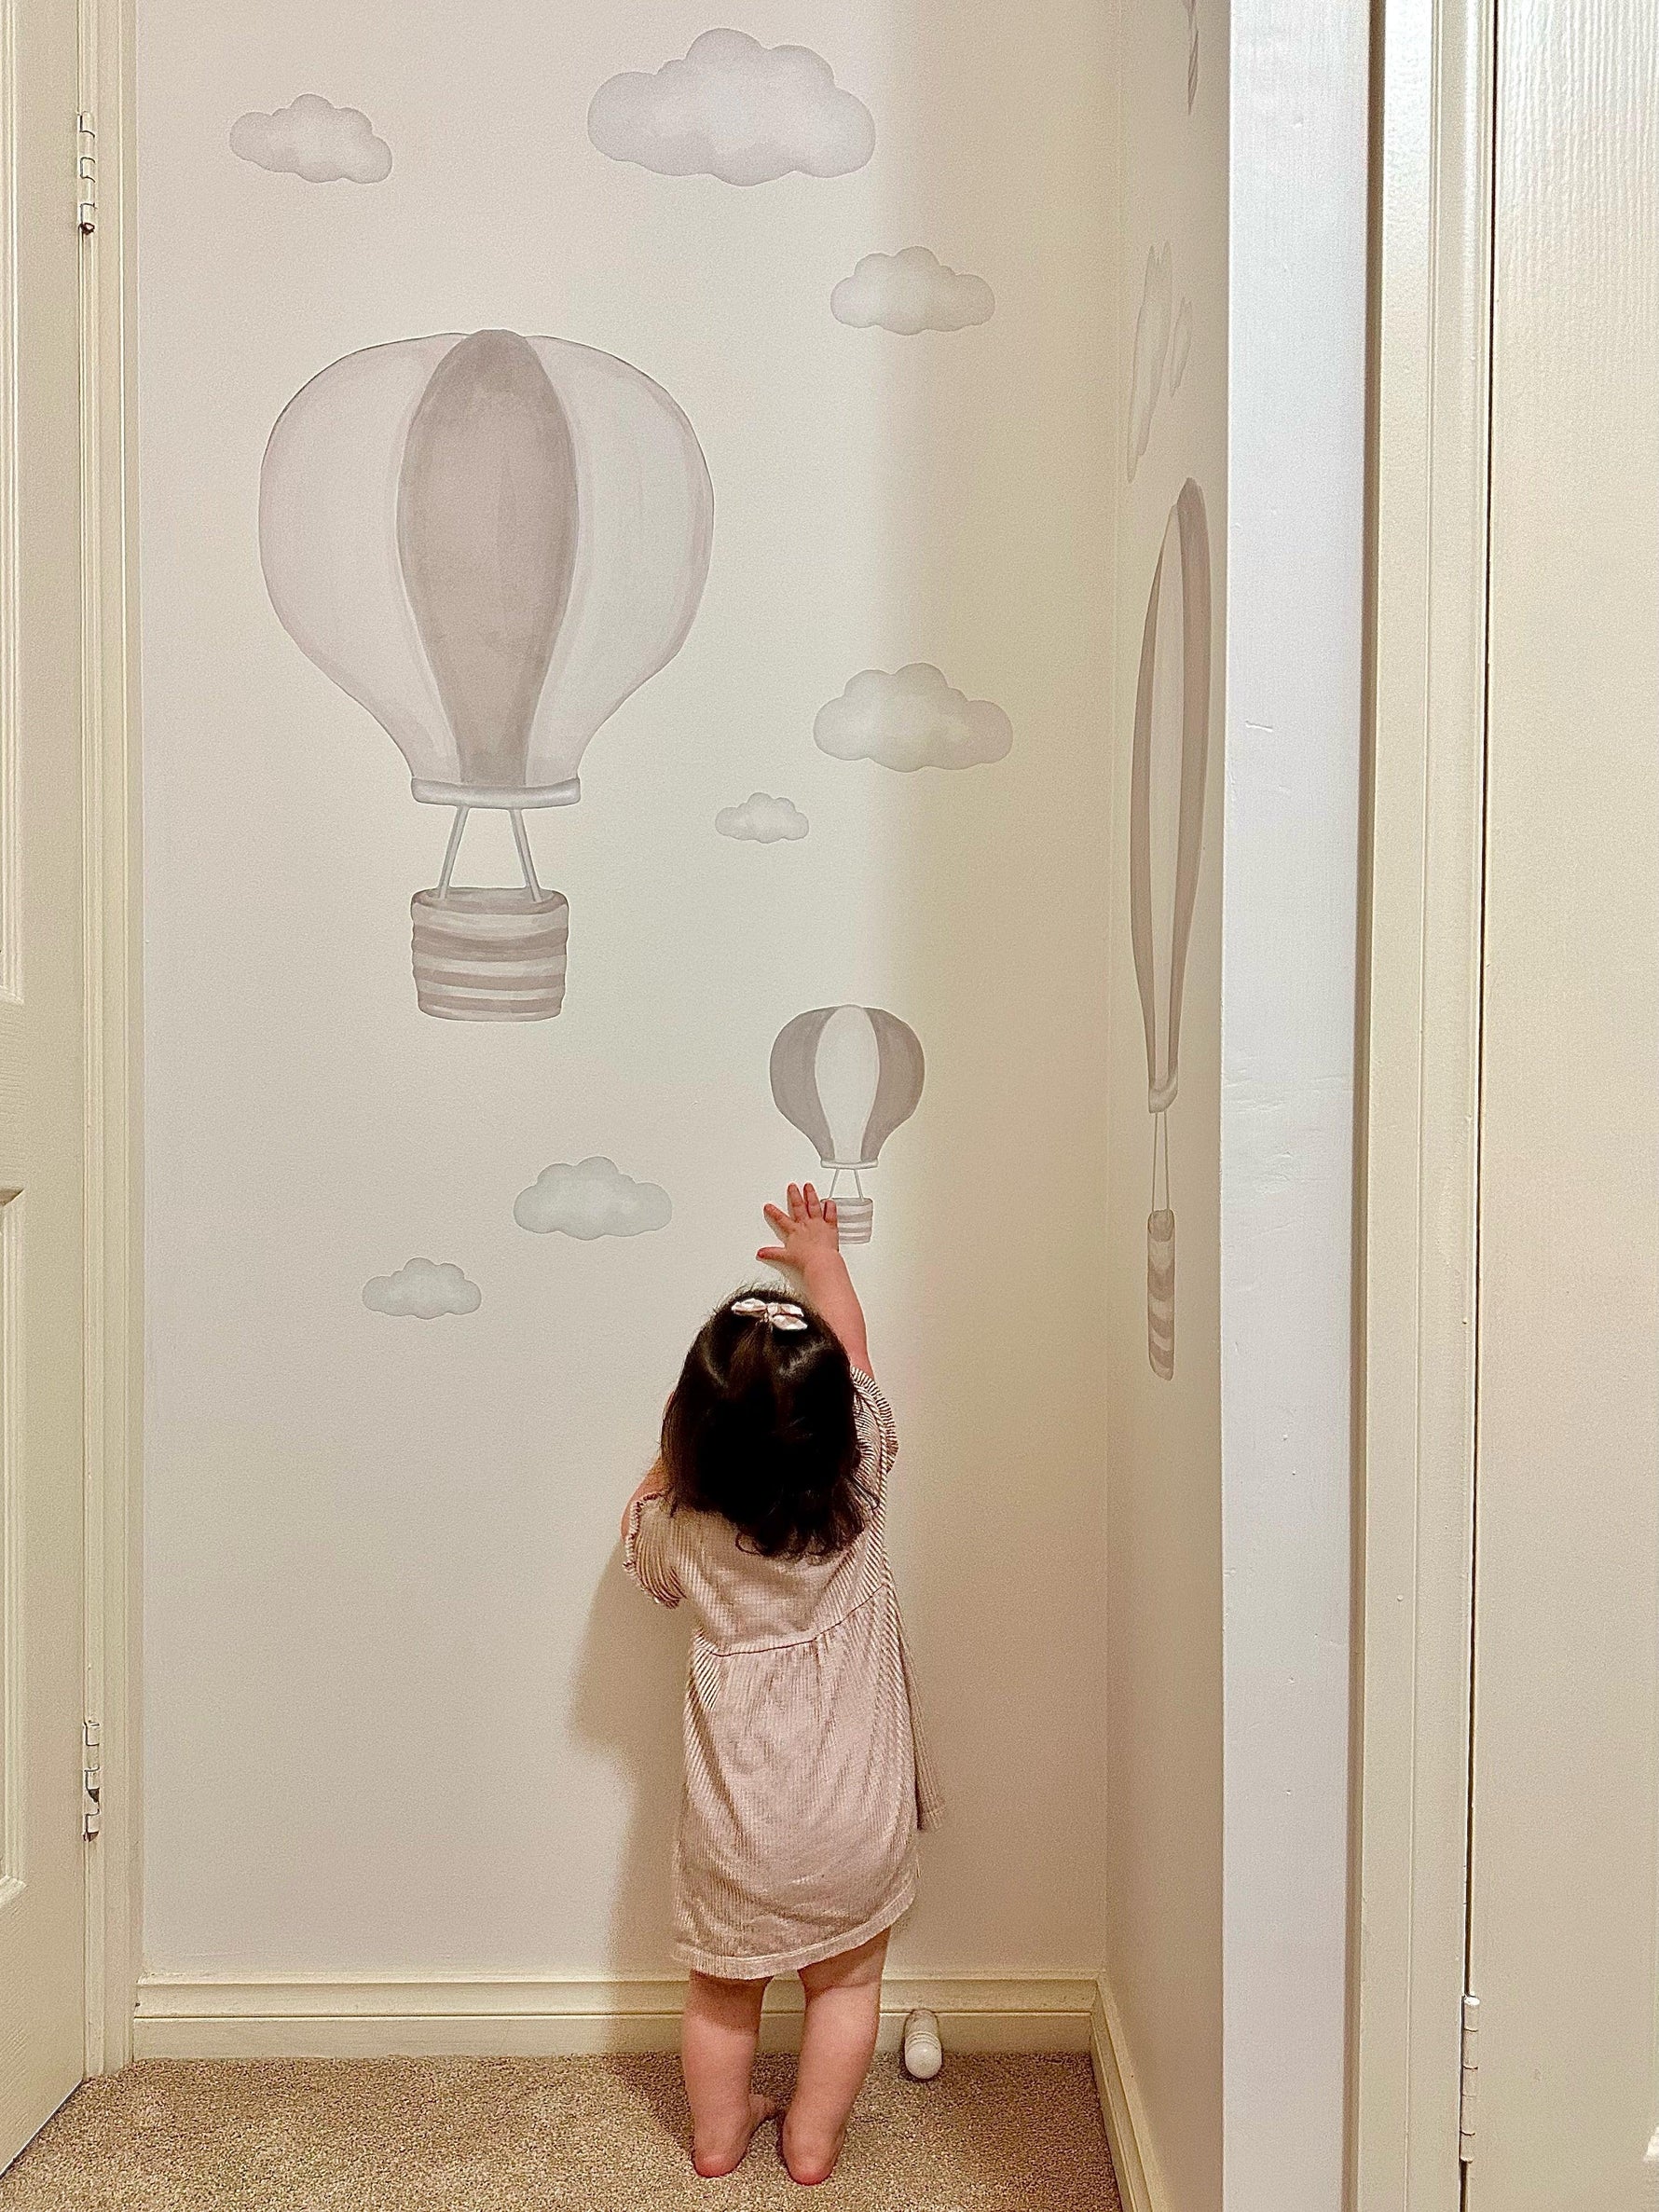 Hot Air Balloon Decals For Your Little Adventurer - Removable Fabric Wall Stickers - lovefrankieart